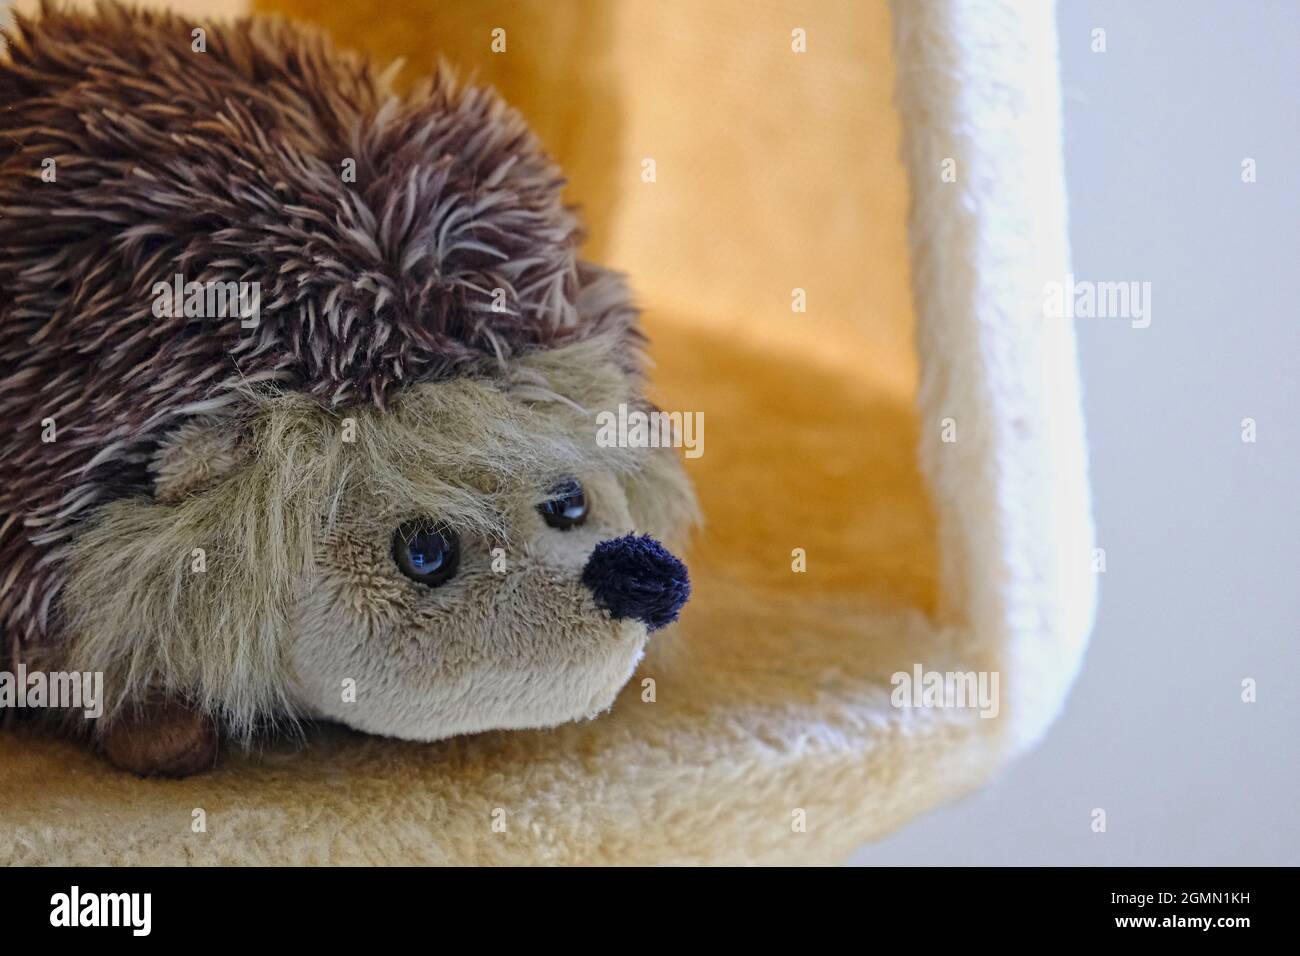 Toy Hedgehog peeping out from a fleece covered box Stock Photo